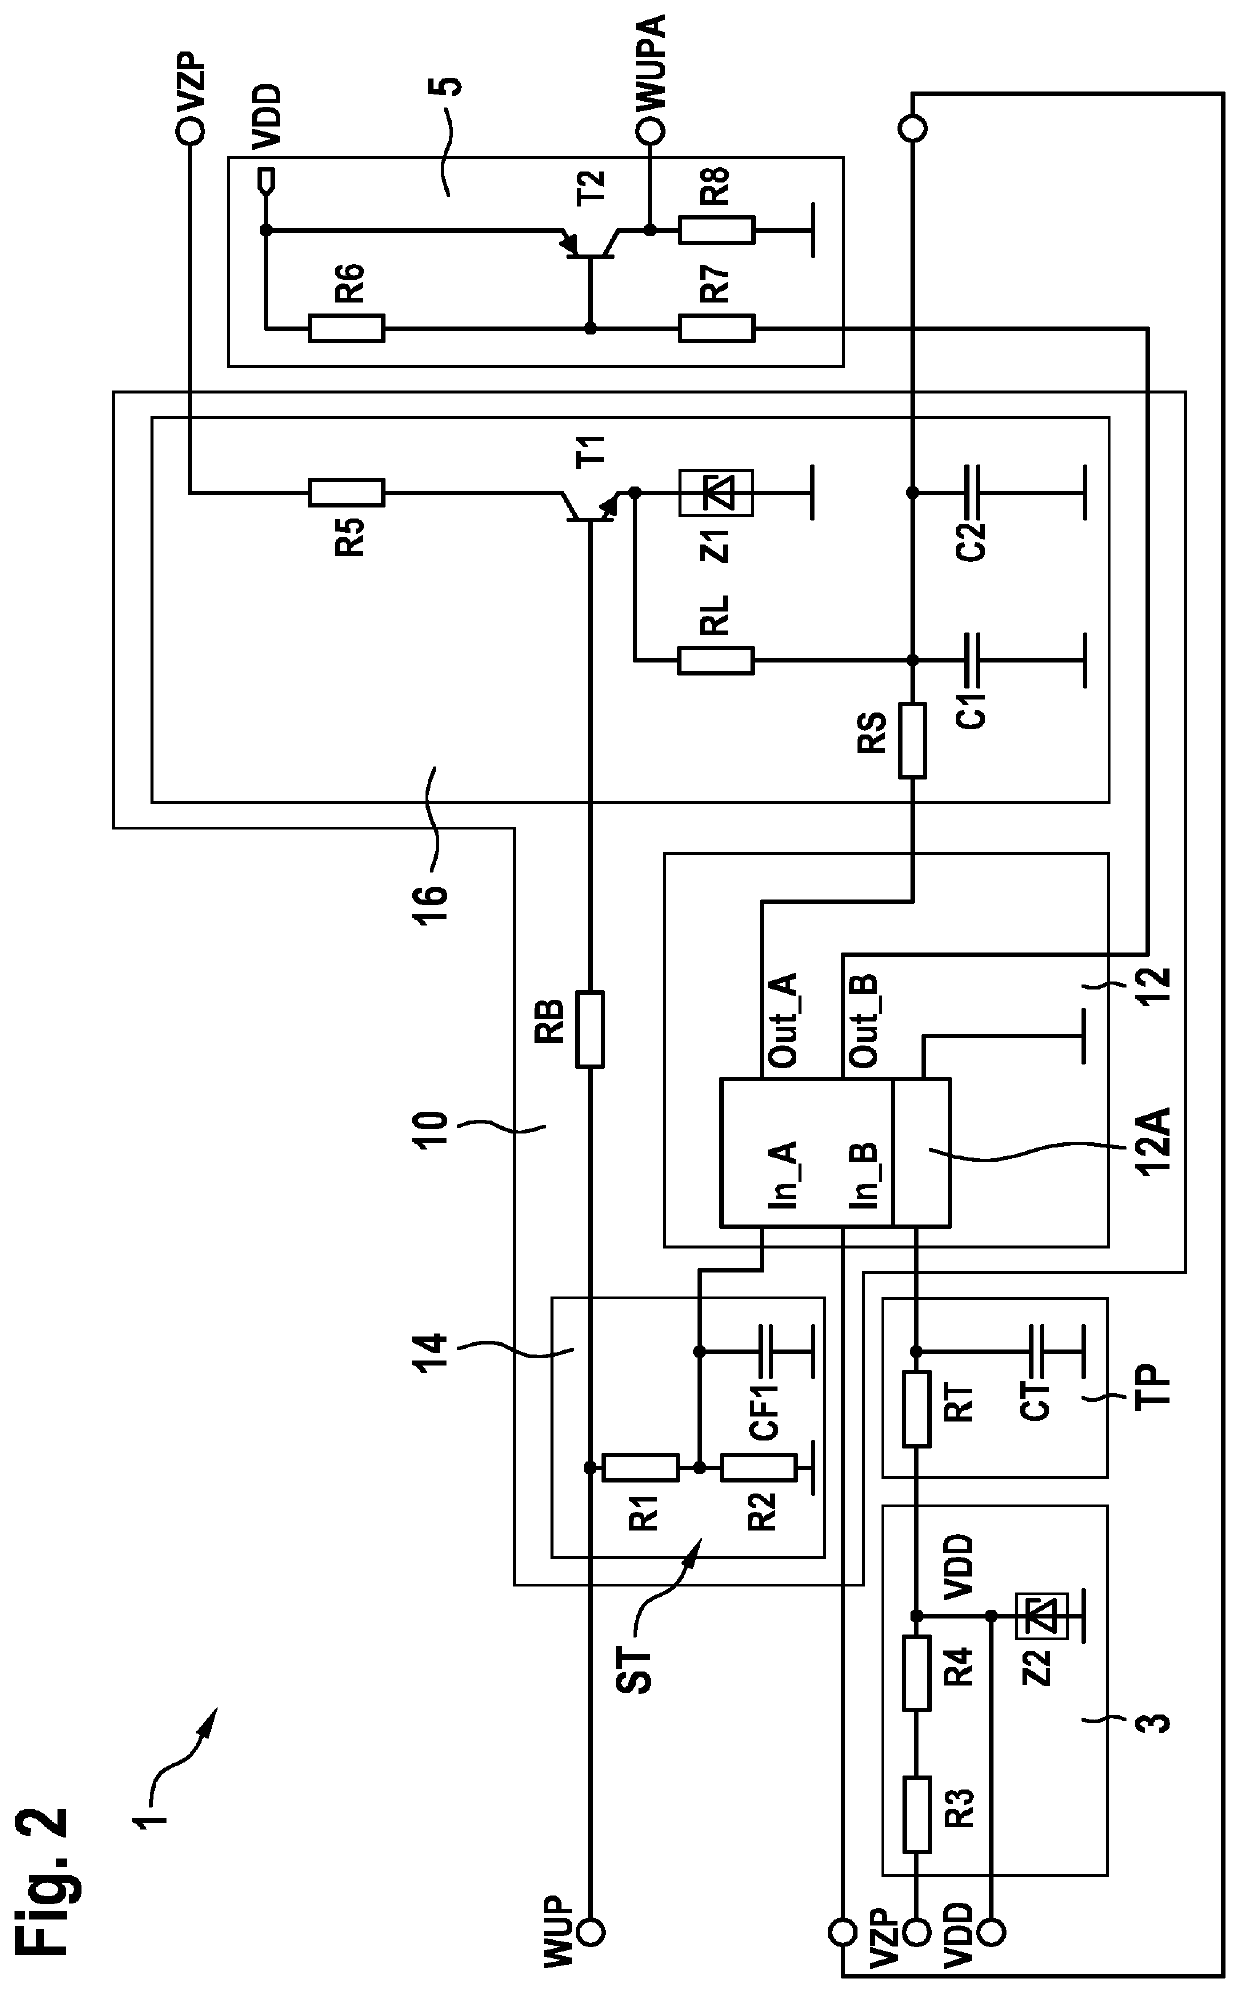 Circuit for processing a wake-up signal